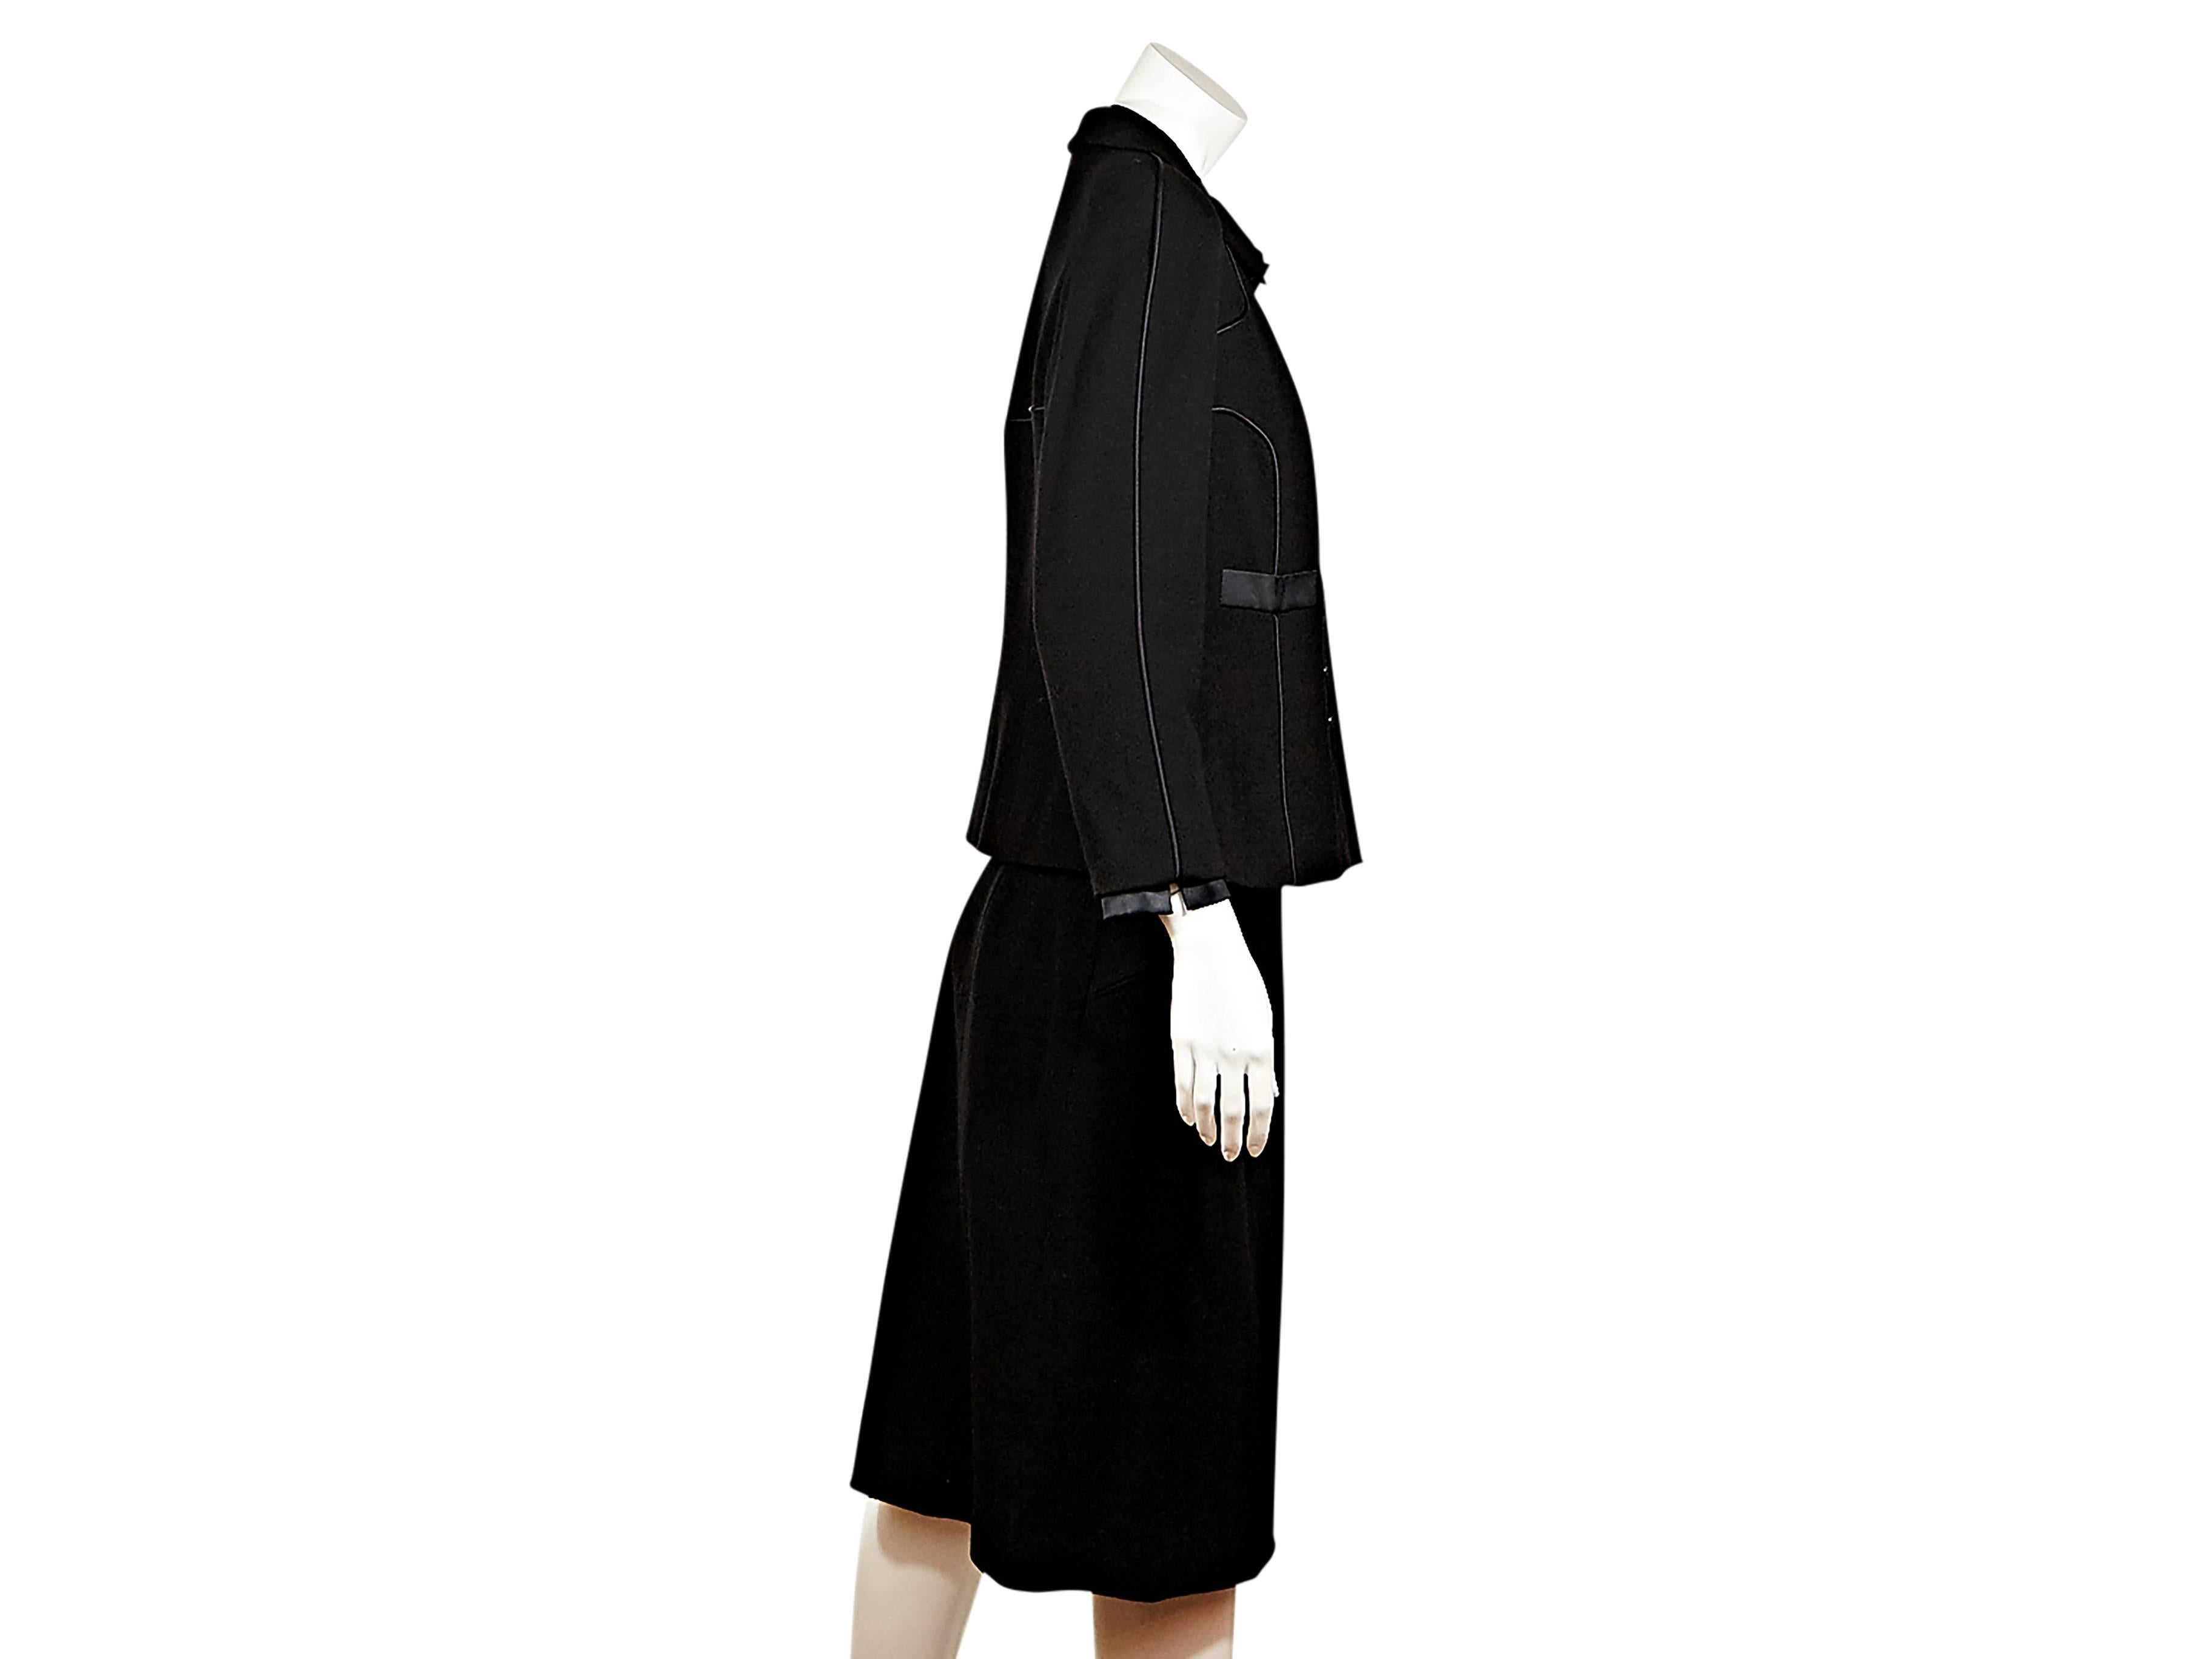 Product details: Black skirt suit set by Chanel.  Black wool jacket with silk trim.  Button-front closure.  Matching black pencil skirt.  Diagonal zip pockets. 

French sizing converted to US sizing at New York store.